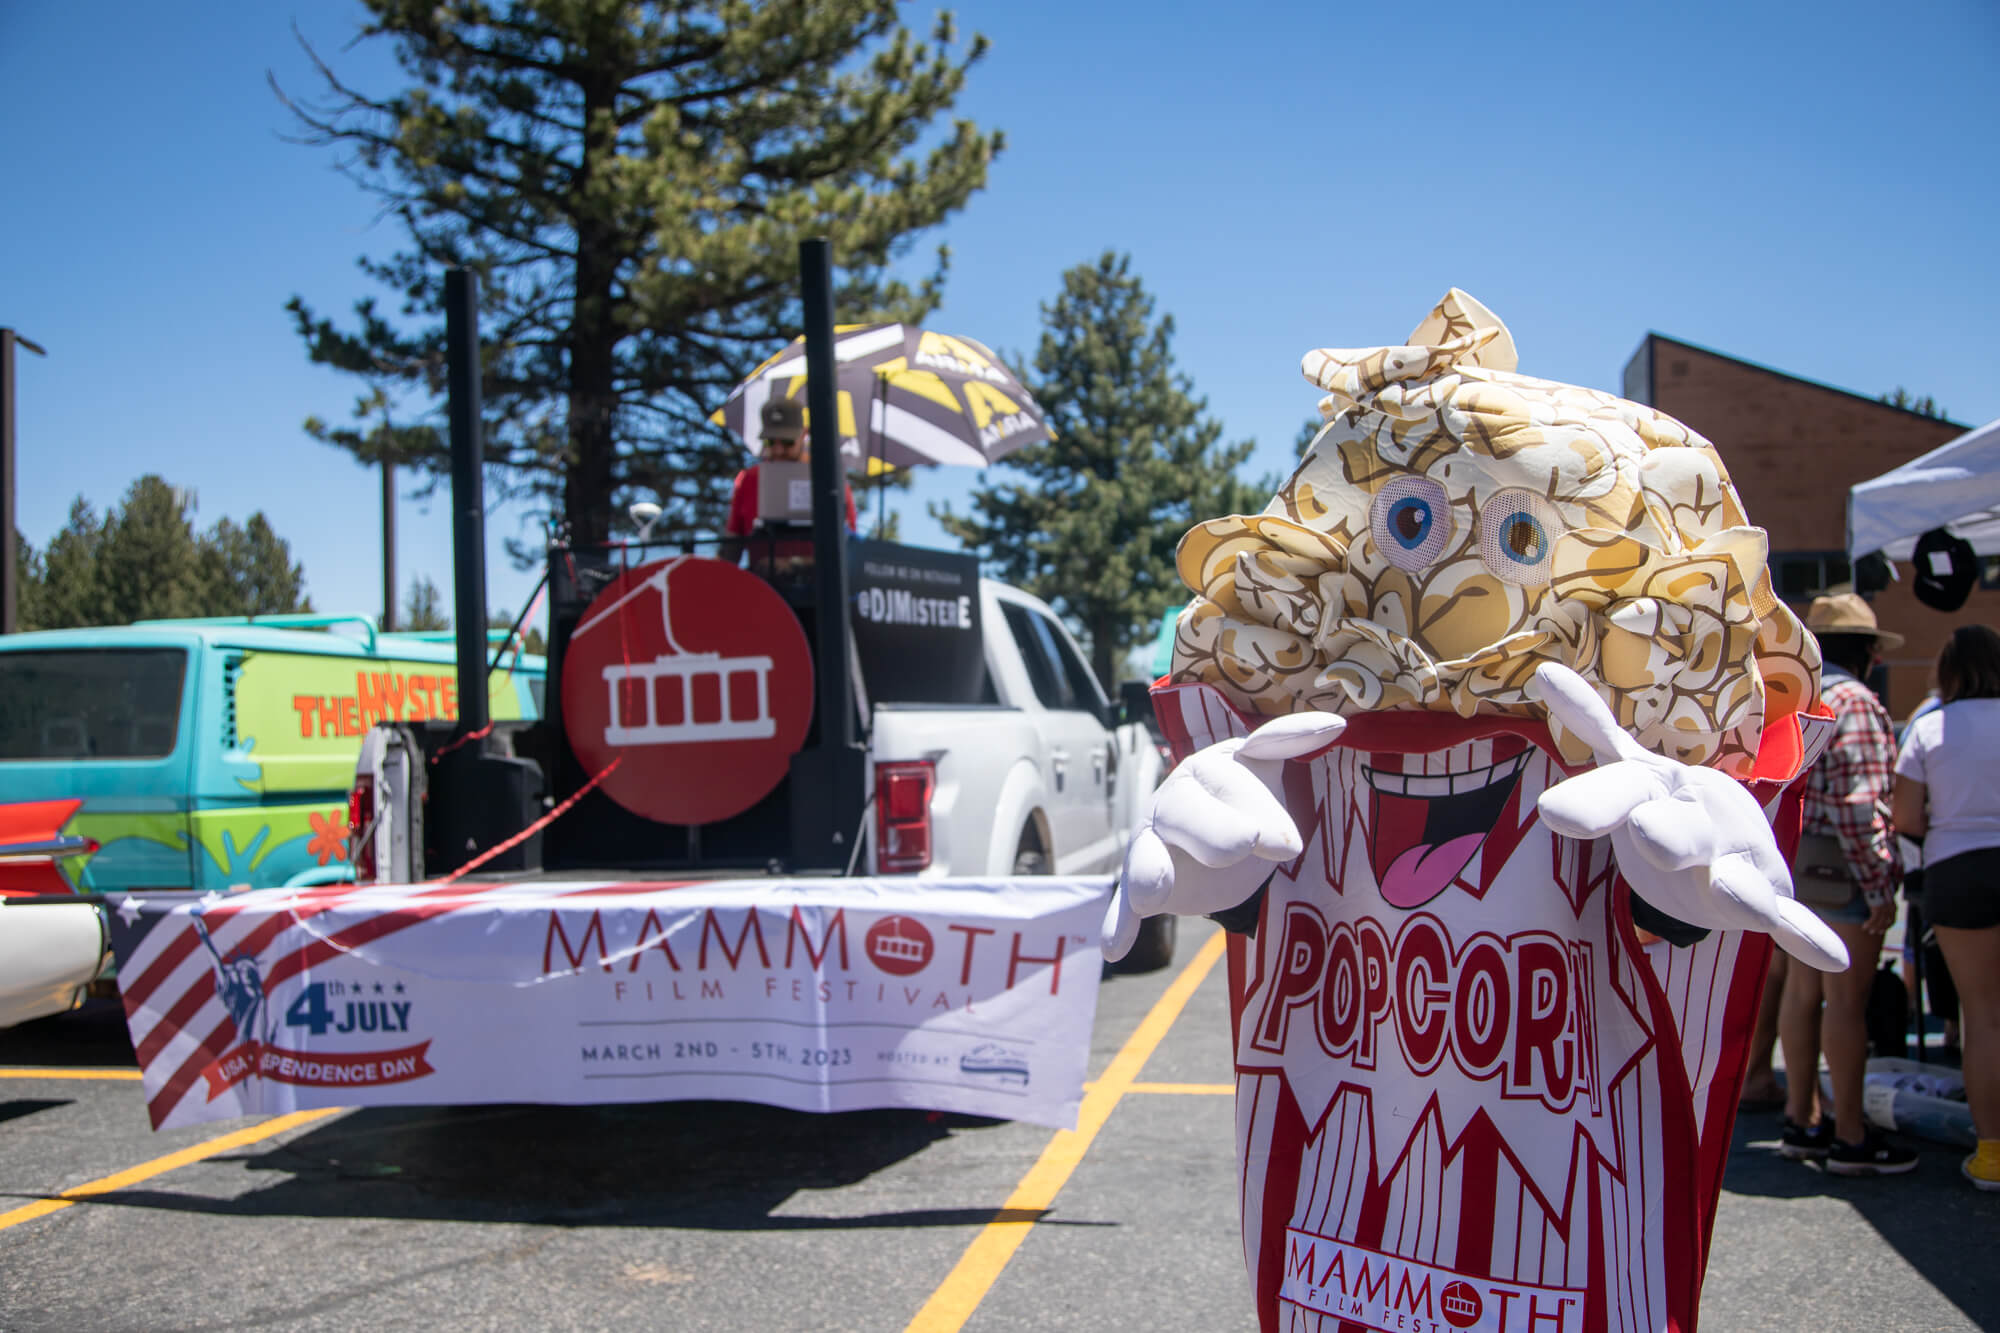 A person dressed as popcorn smiles at the camera in front of the Mammoth Film Festival float in the Mammoth Lakes 4th of July parade